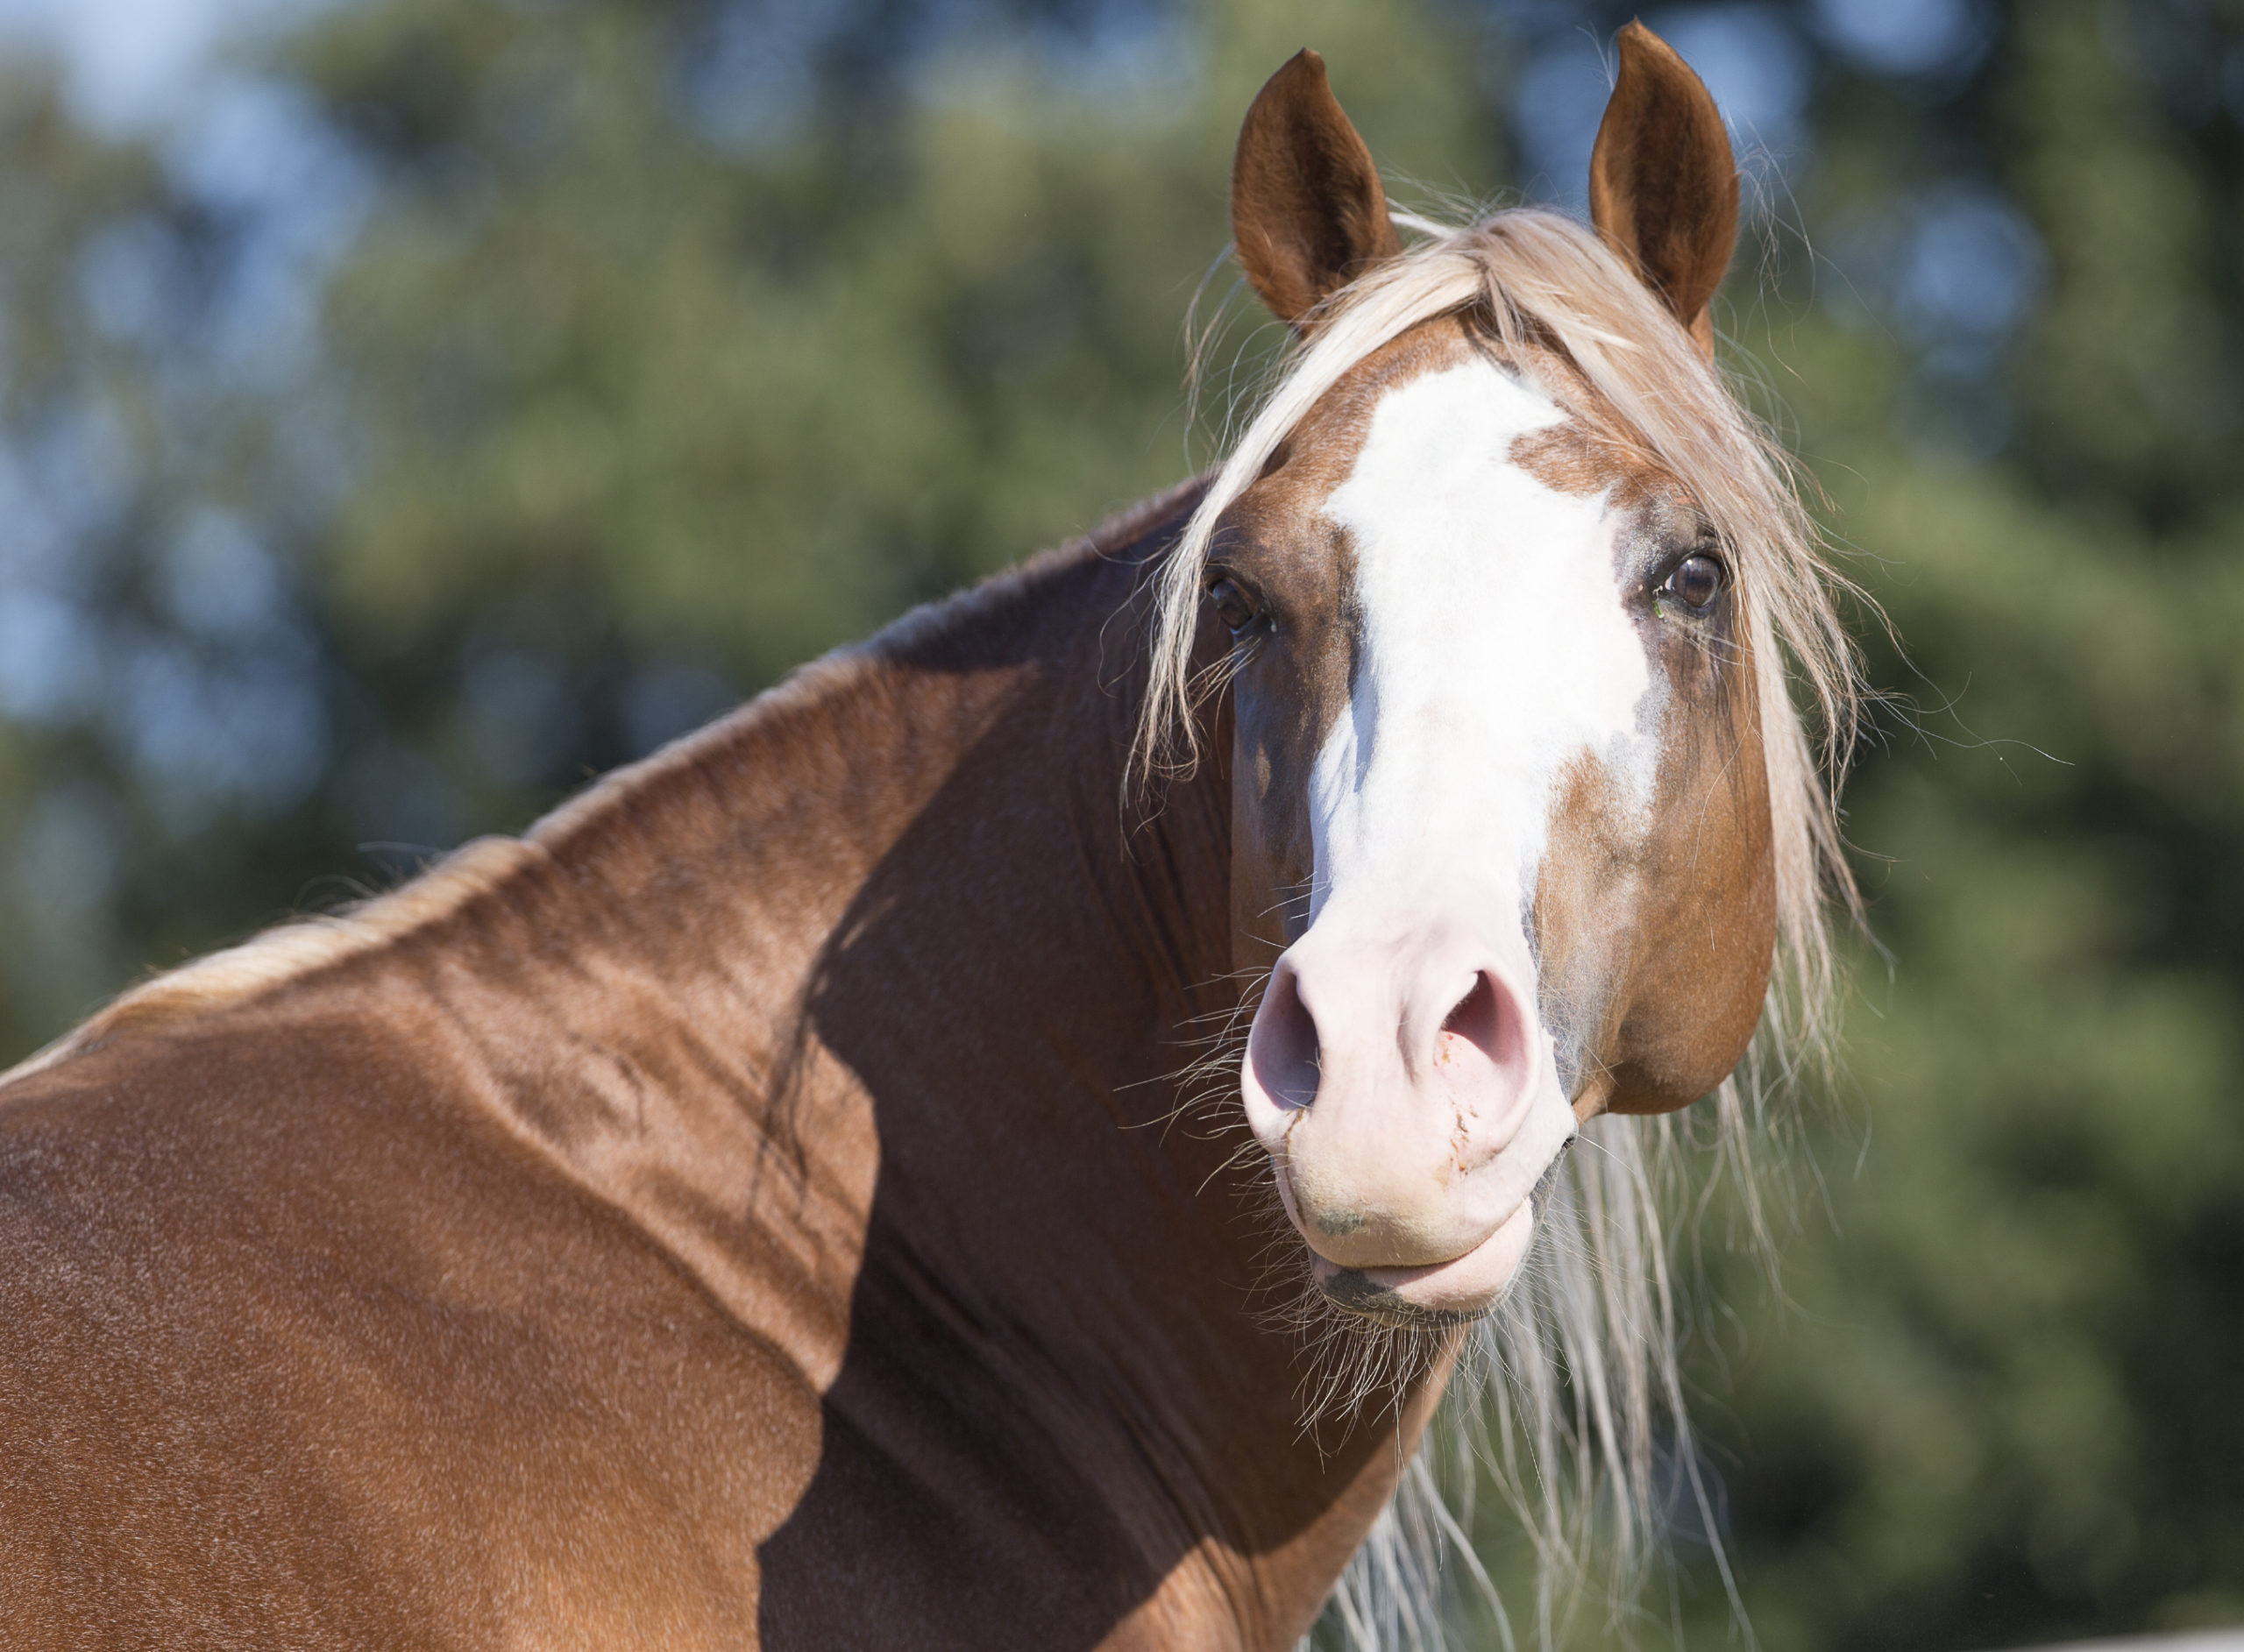 Horses can tell if you’re having a bad day